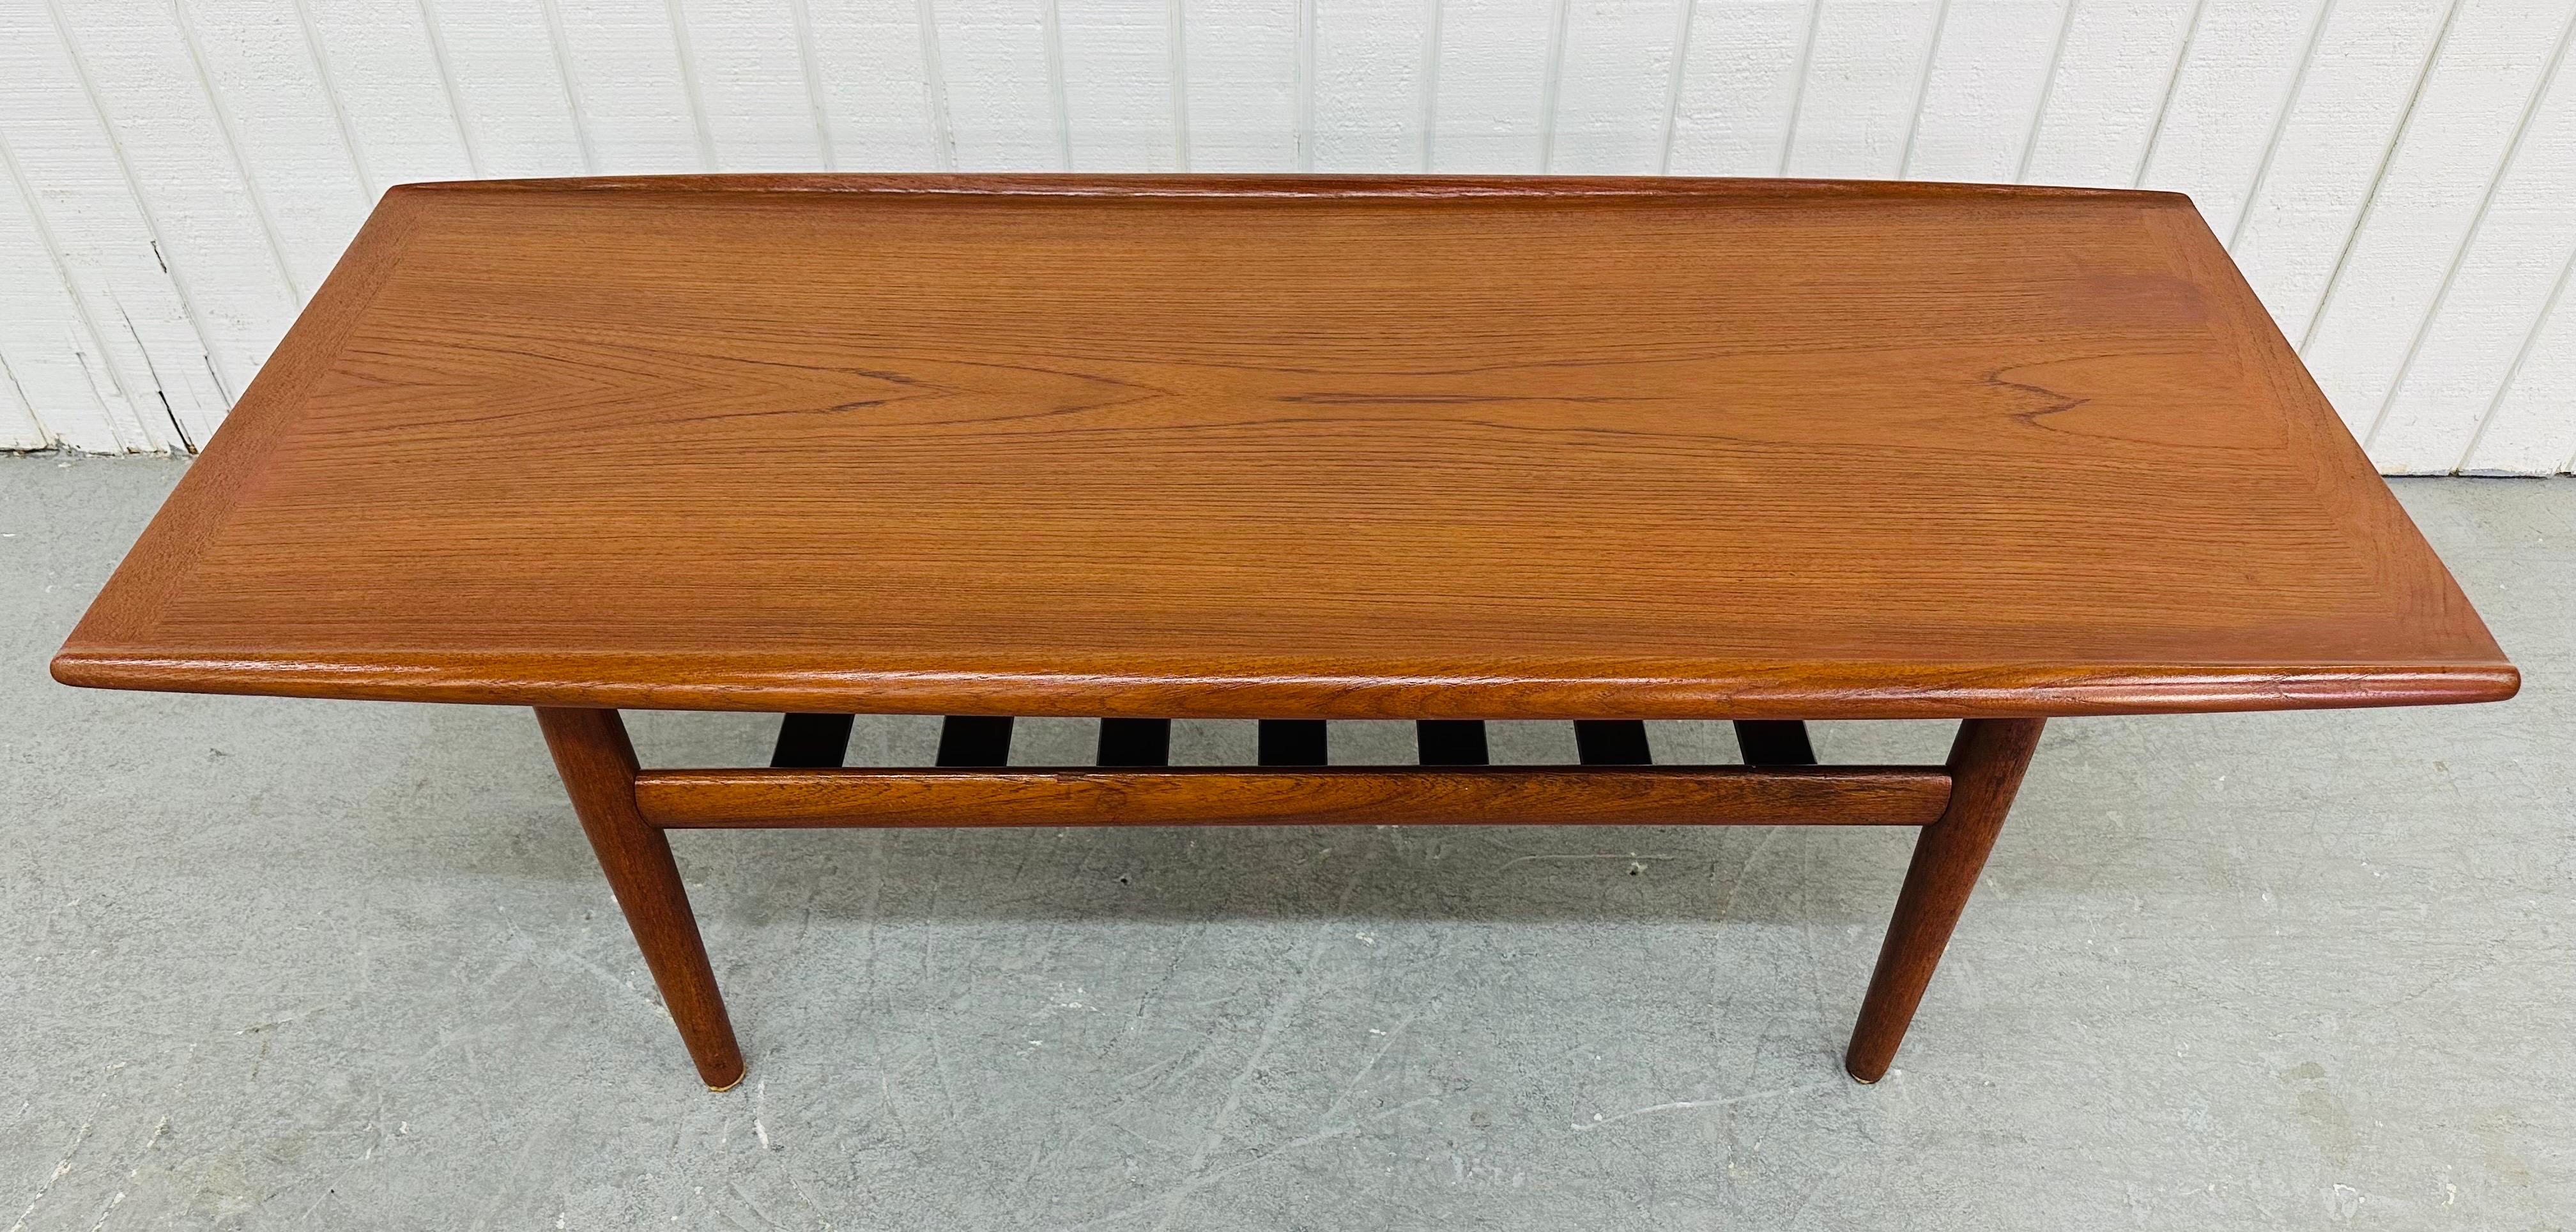 This listing is for a Mid-Century Danish Modern Teak Coffee Table. Featuring a rectangular top with curved edges, modern legs, a lower tier magazine rack, and a beautiful teak finish. This is an exceptional combination of quality and design!